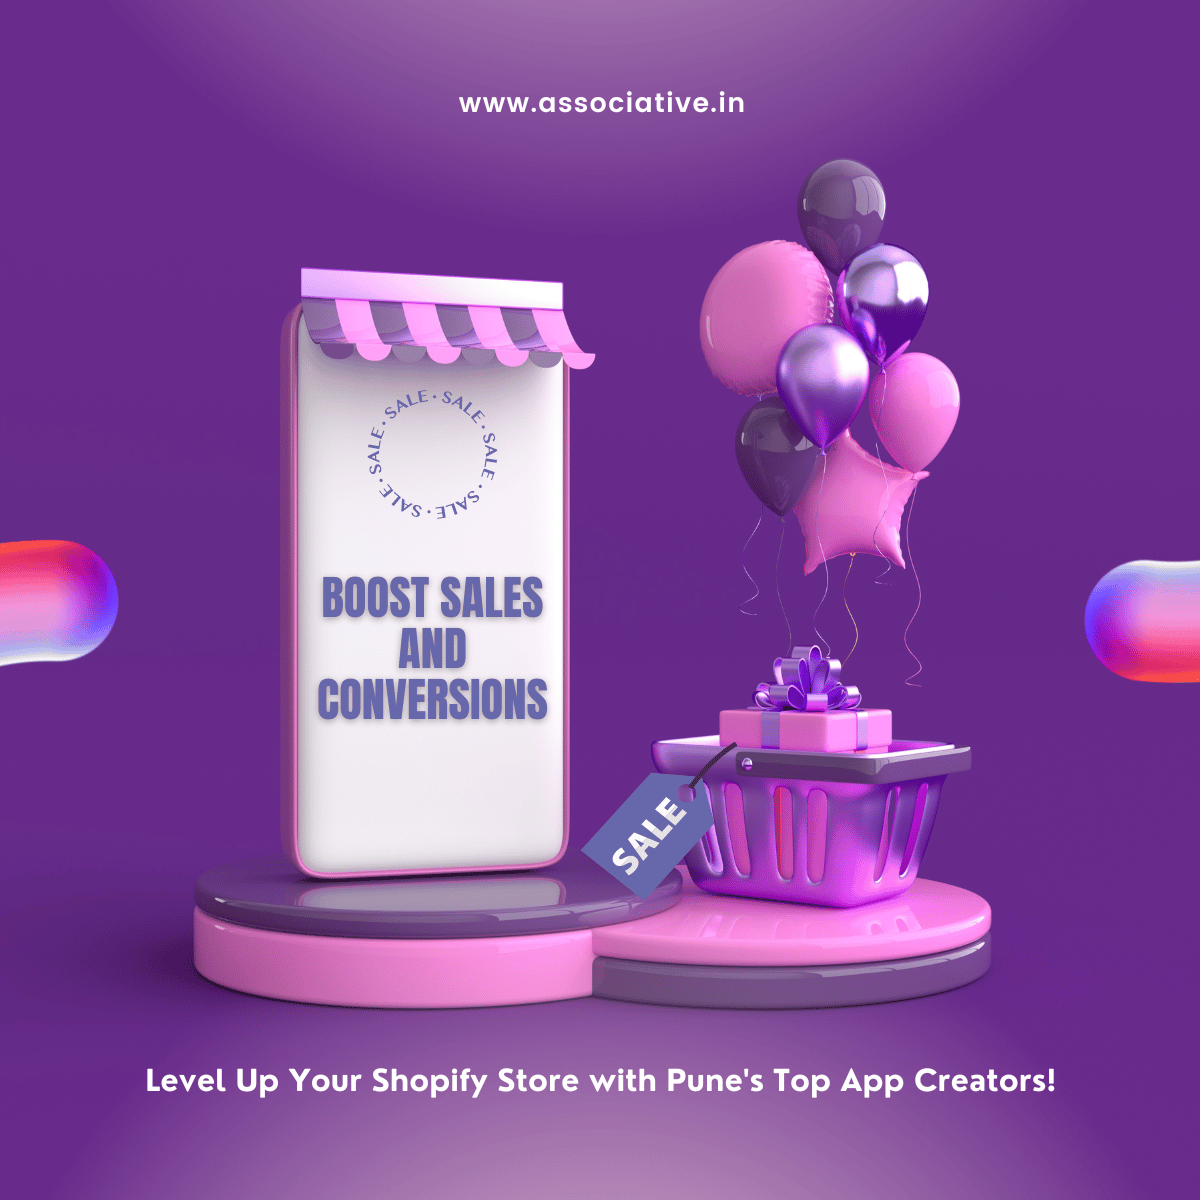 Level Up Your Shopify Store with Pune's Top App Creators!